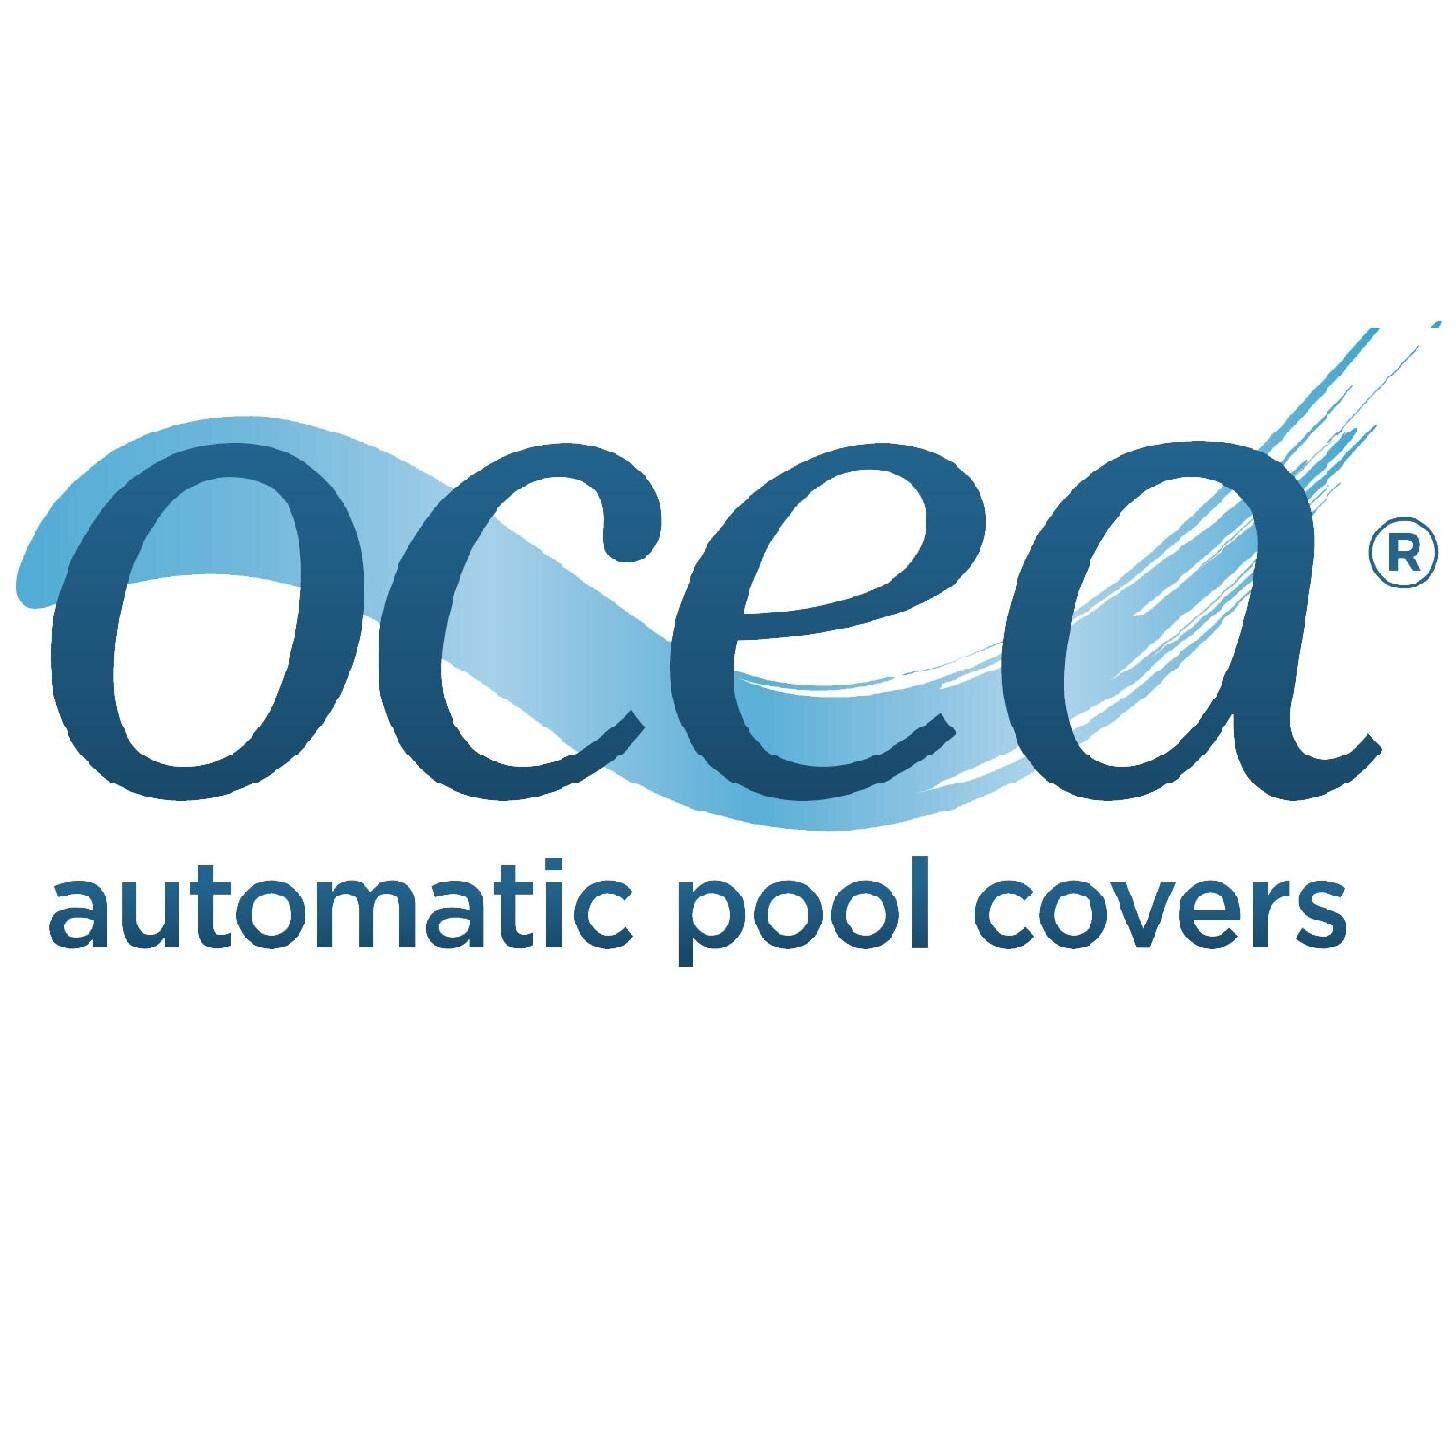 Ocea automatic pool covers